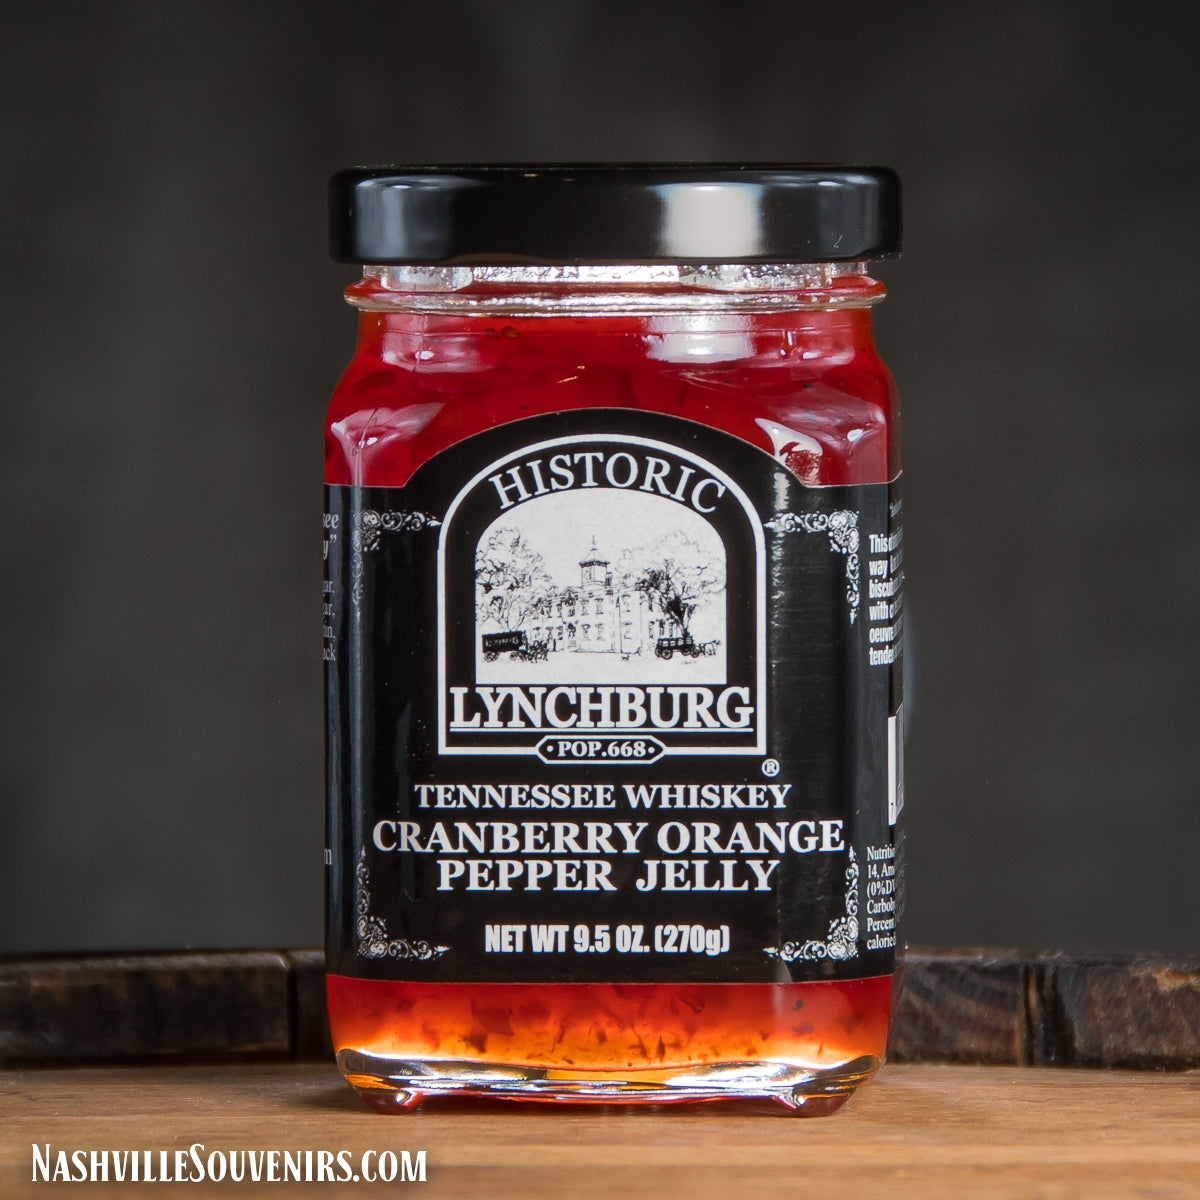 Historic Lynchburg Cranberry Orange Pepper Jelly is a unique mixture of Jack Daniels goodness, try it and see why it's so special. FREE SHIPPING on all US orders over $75!